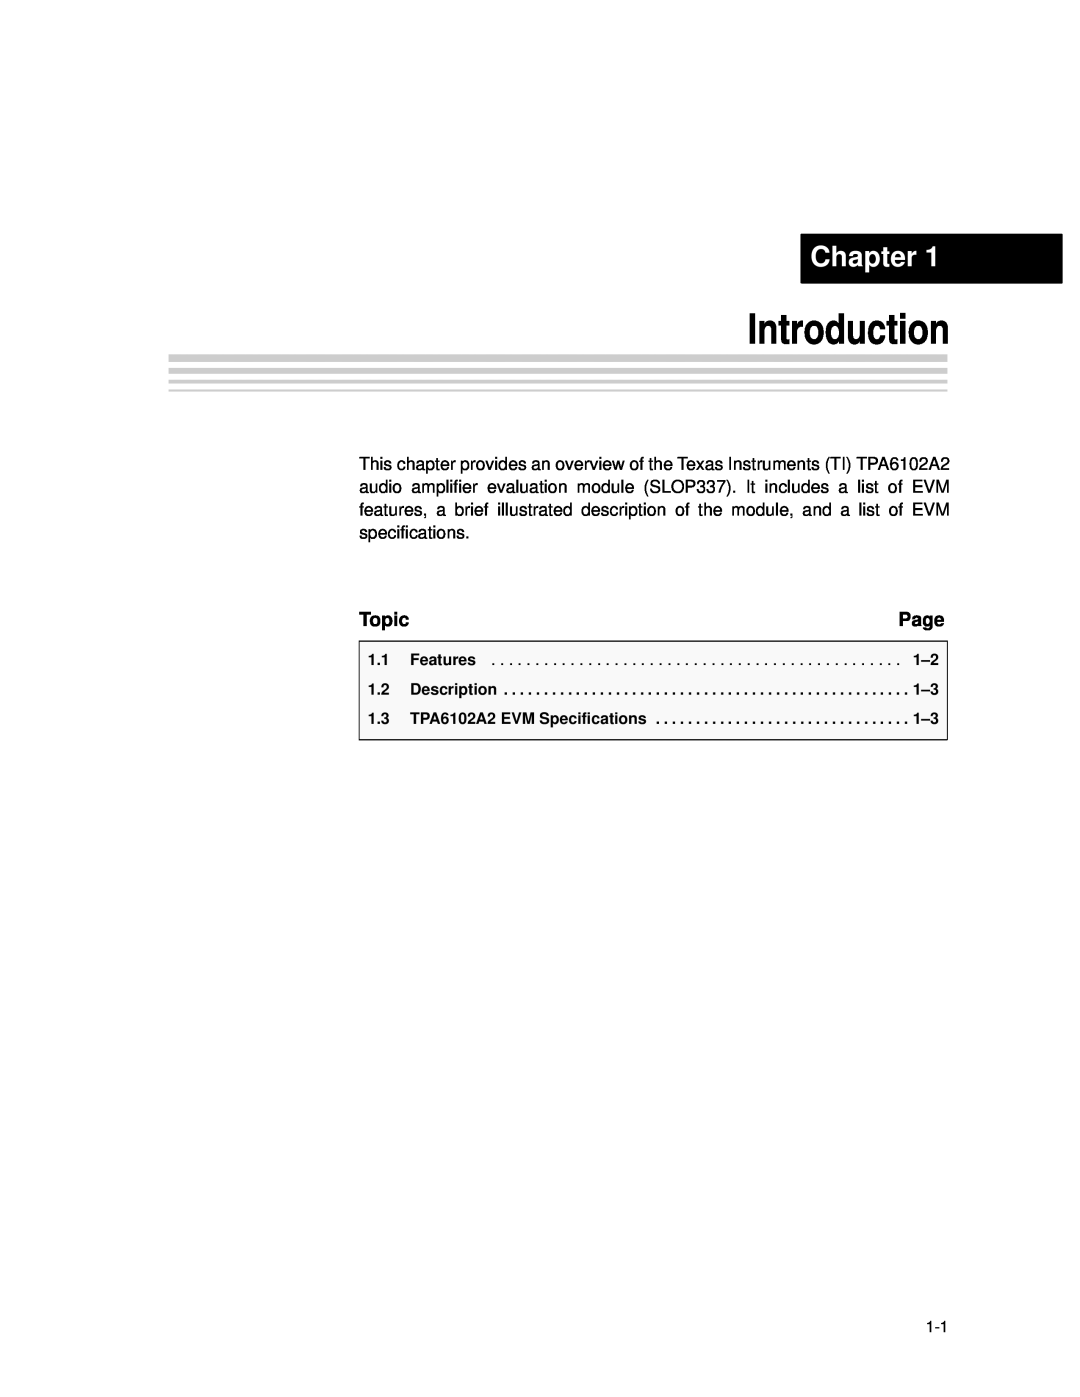 Texas Instruments TPA6102A2 manual Introduction, Chapter, Page, Topic 